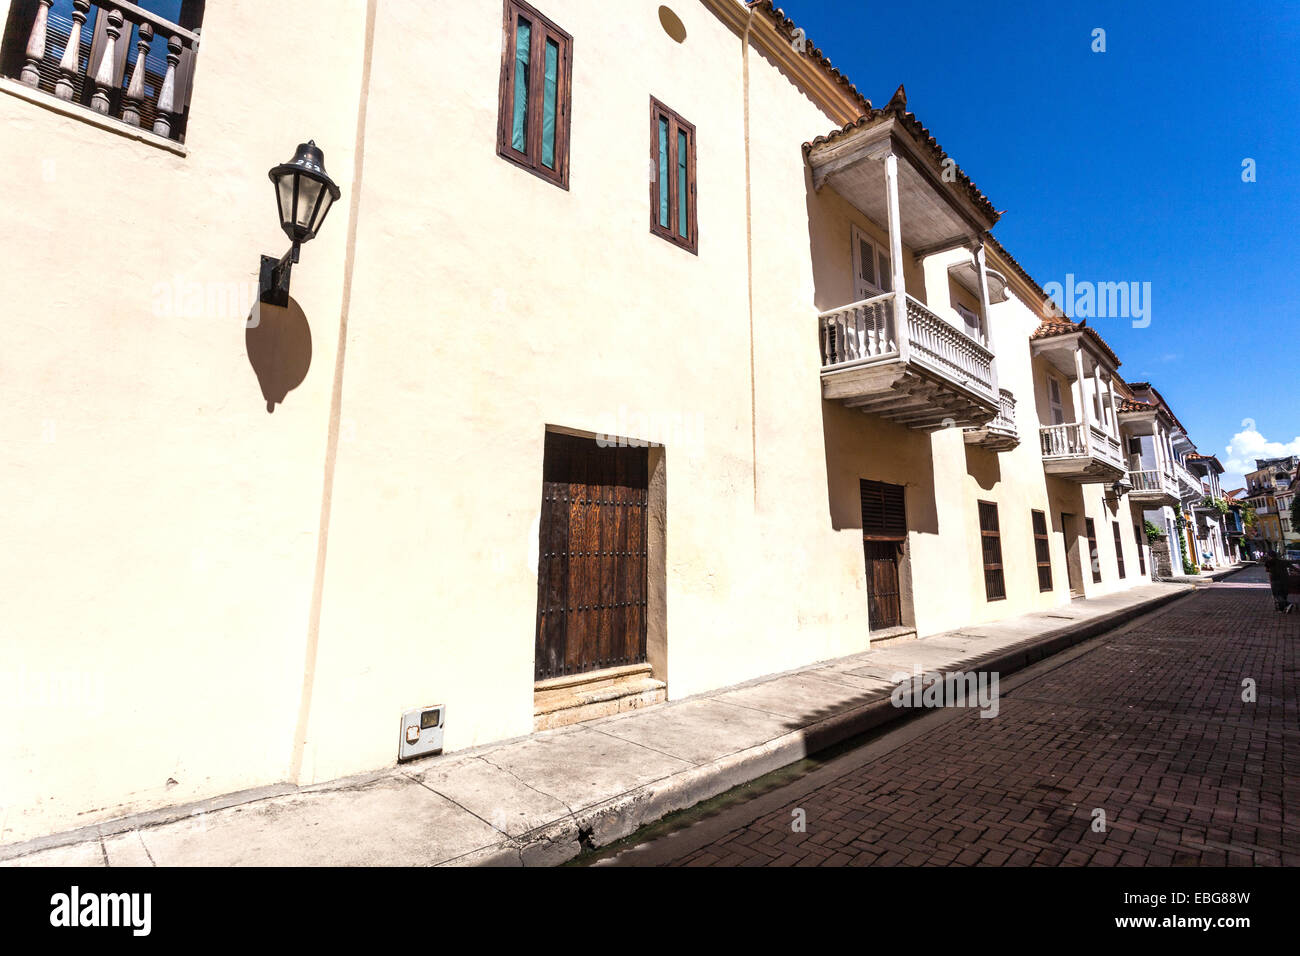 Row of colonial Spanish architecture houses, Cartagena de Indias, Colombia. Stock Photo